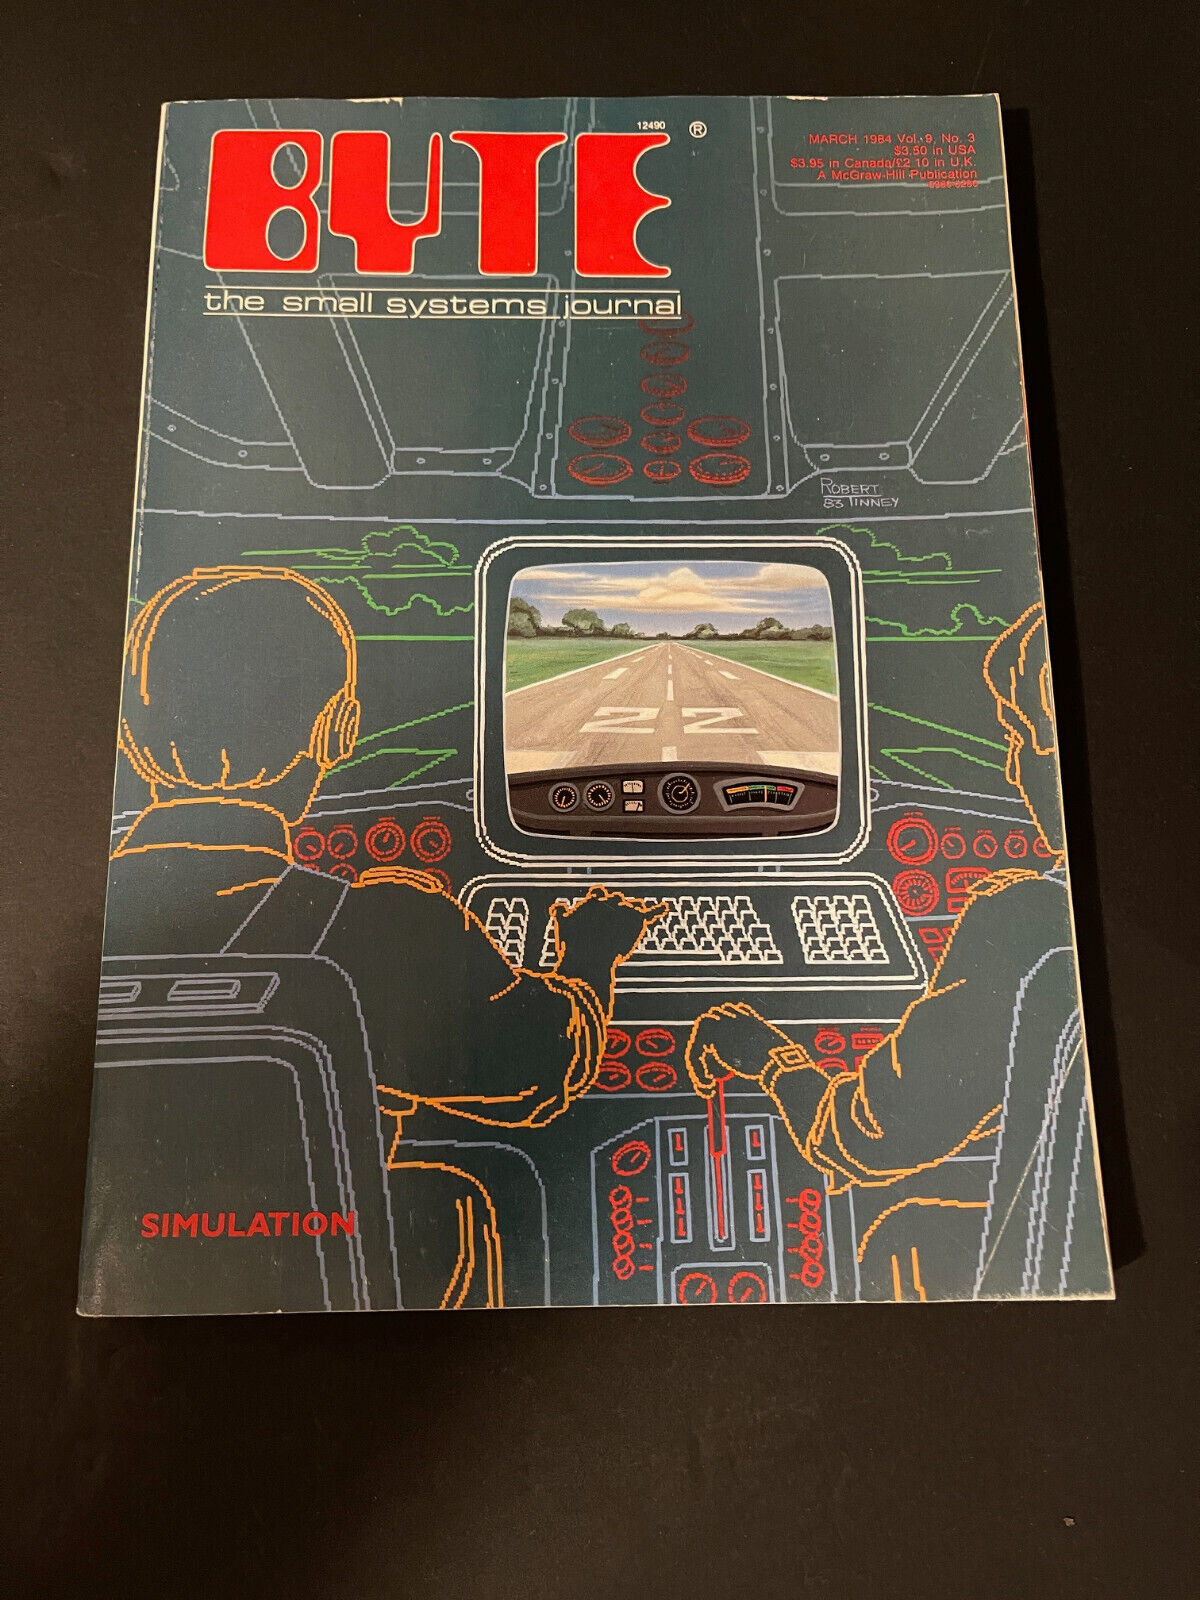 BYTE MAGAZINE MARCH 1984 VOL. 9 NO. 3 RARE LAST ONES VERY GOOD CONDITION QTY-1